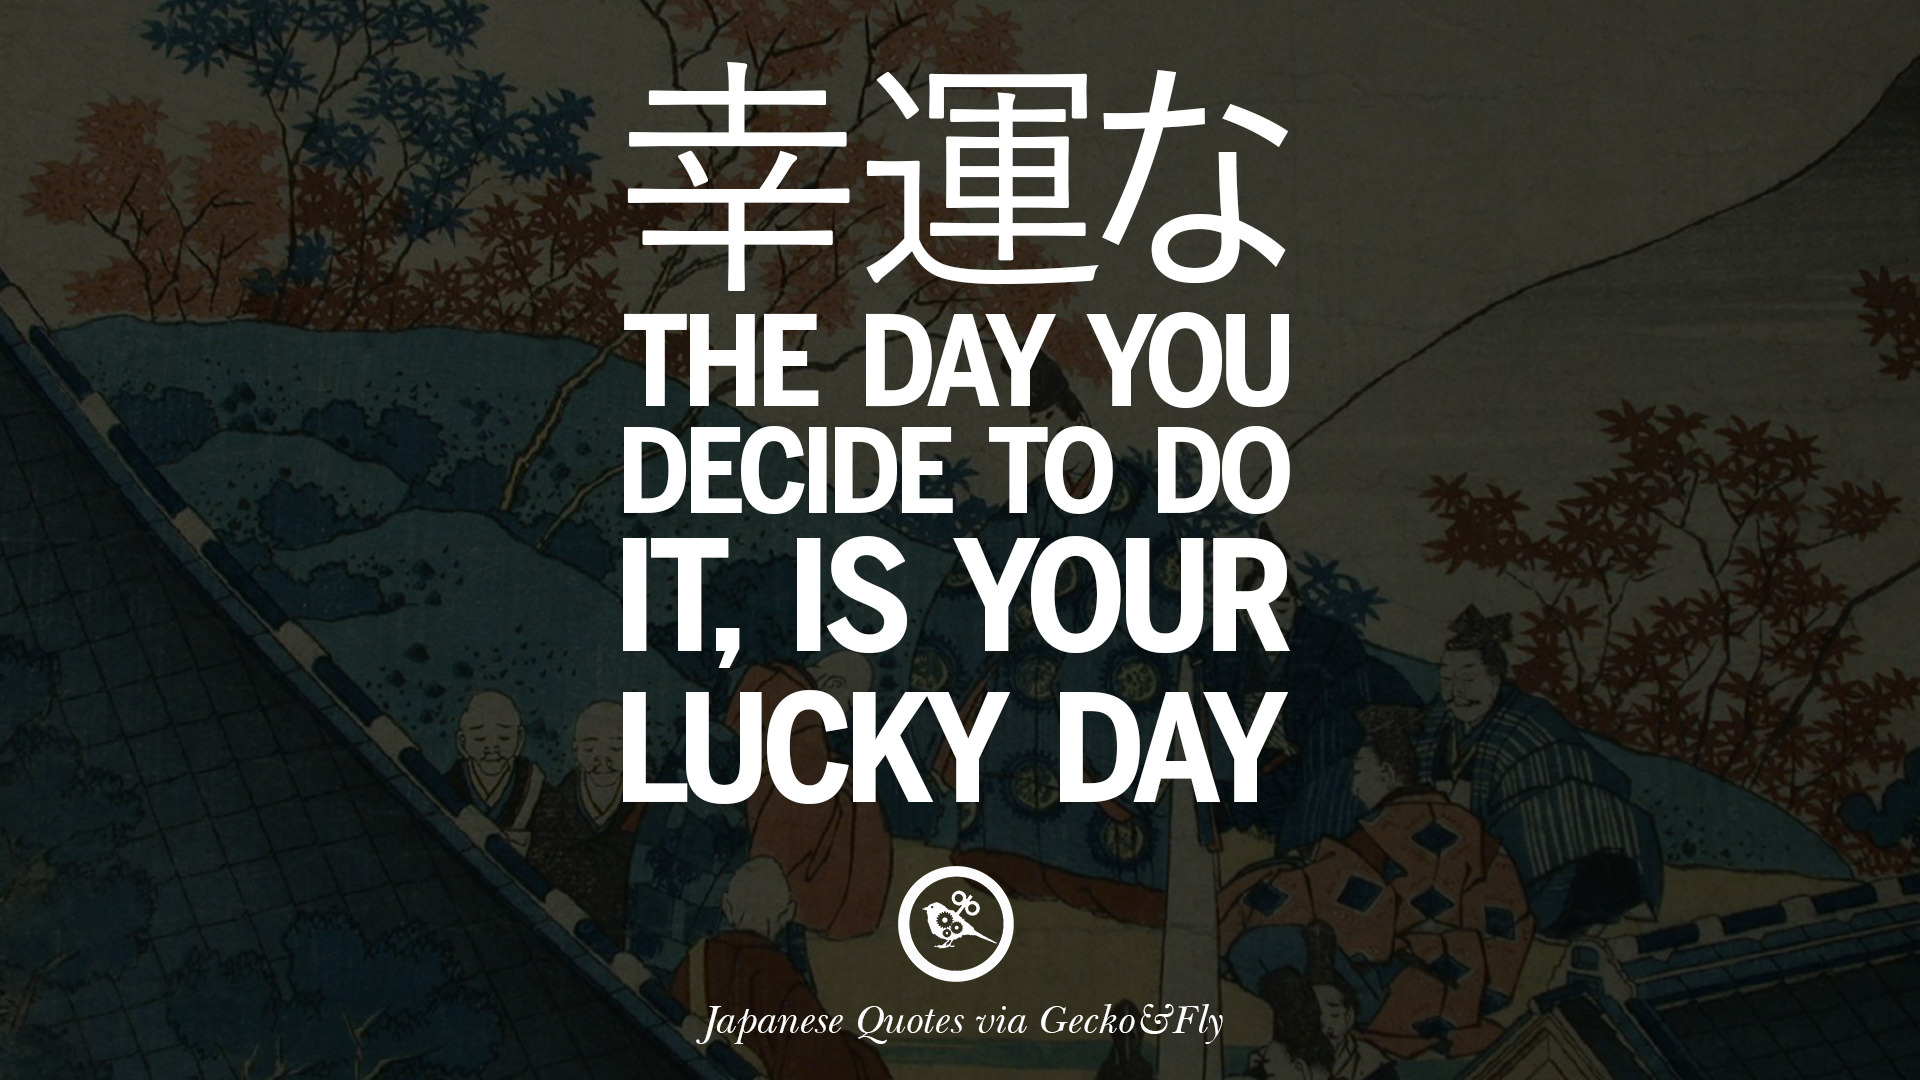 14 Japanese Words Of Wisdom - Inspirational Sayings And Quotes